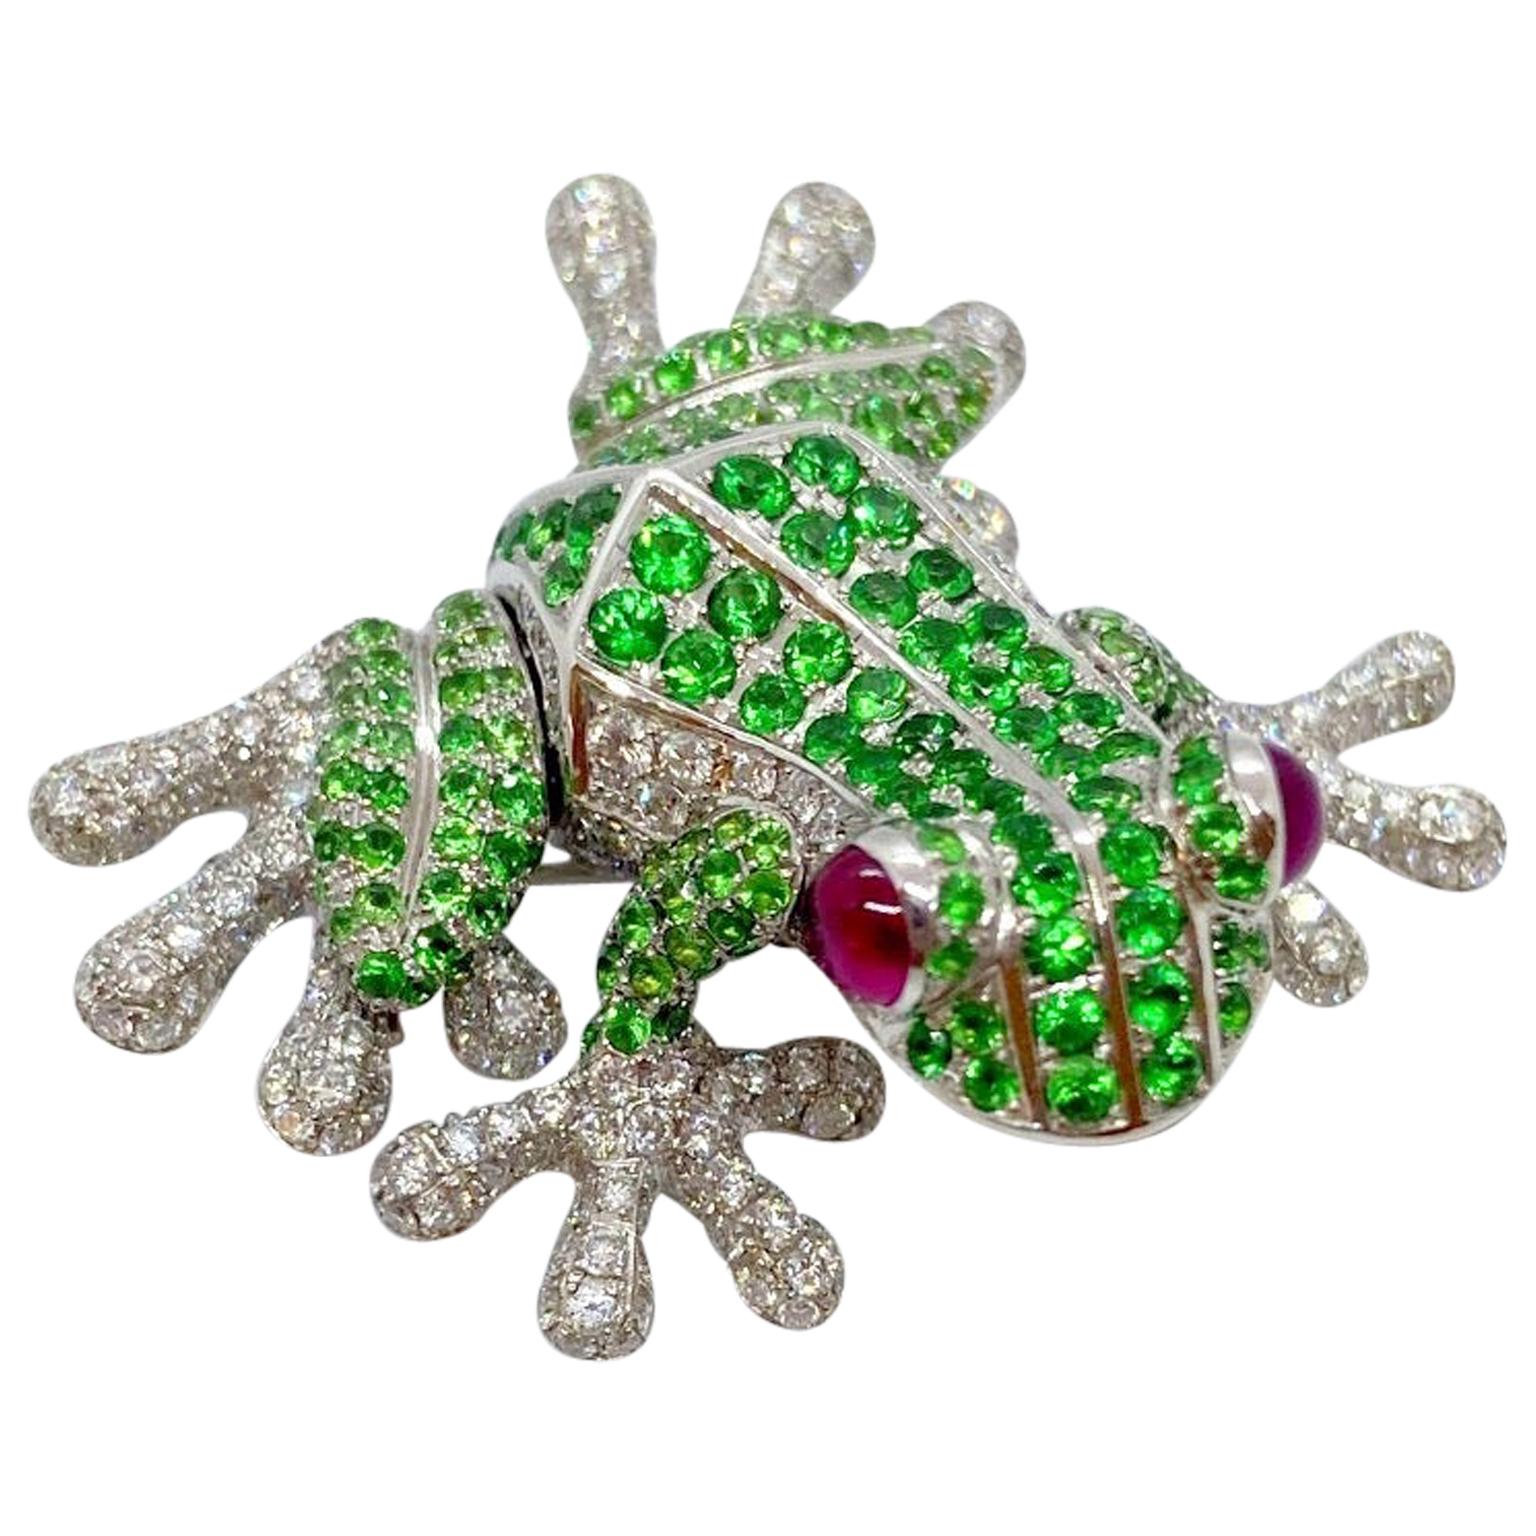 Cellini 18 Karat White Gold Jumping Frog Brooch with Tsavorites and Diamonds